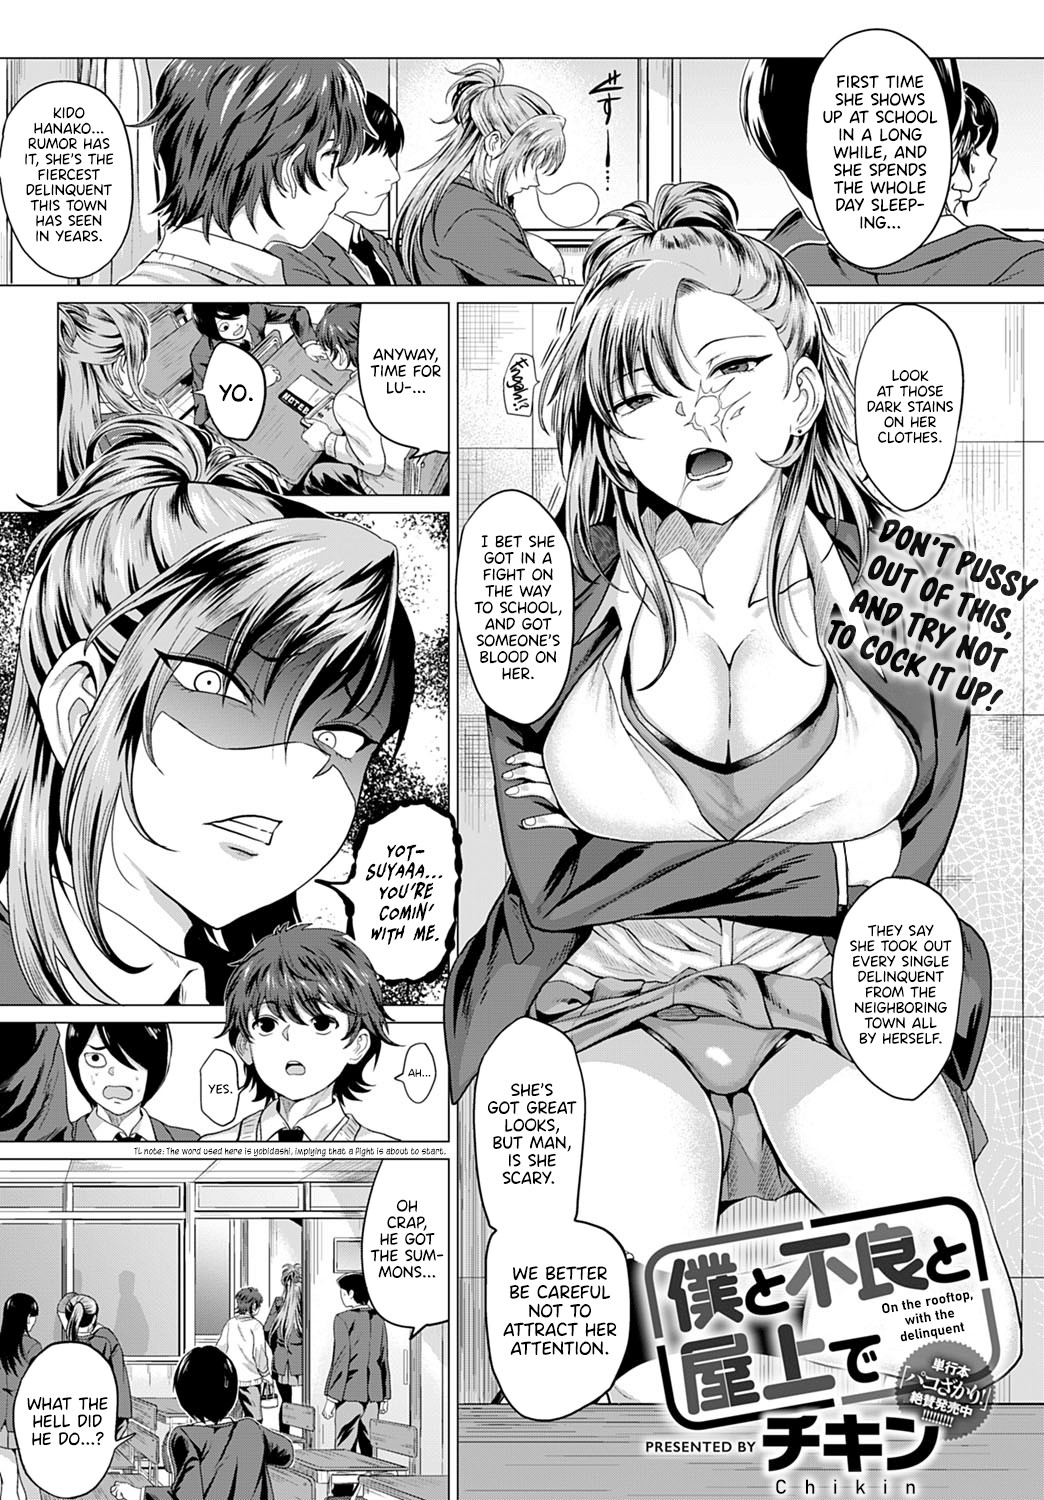 Hentai Manga Comic-On the Rooftop, with the Delinquent-Read-1